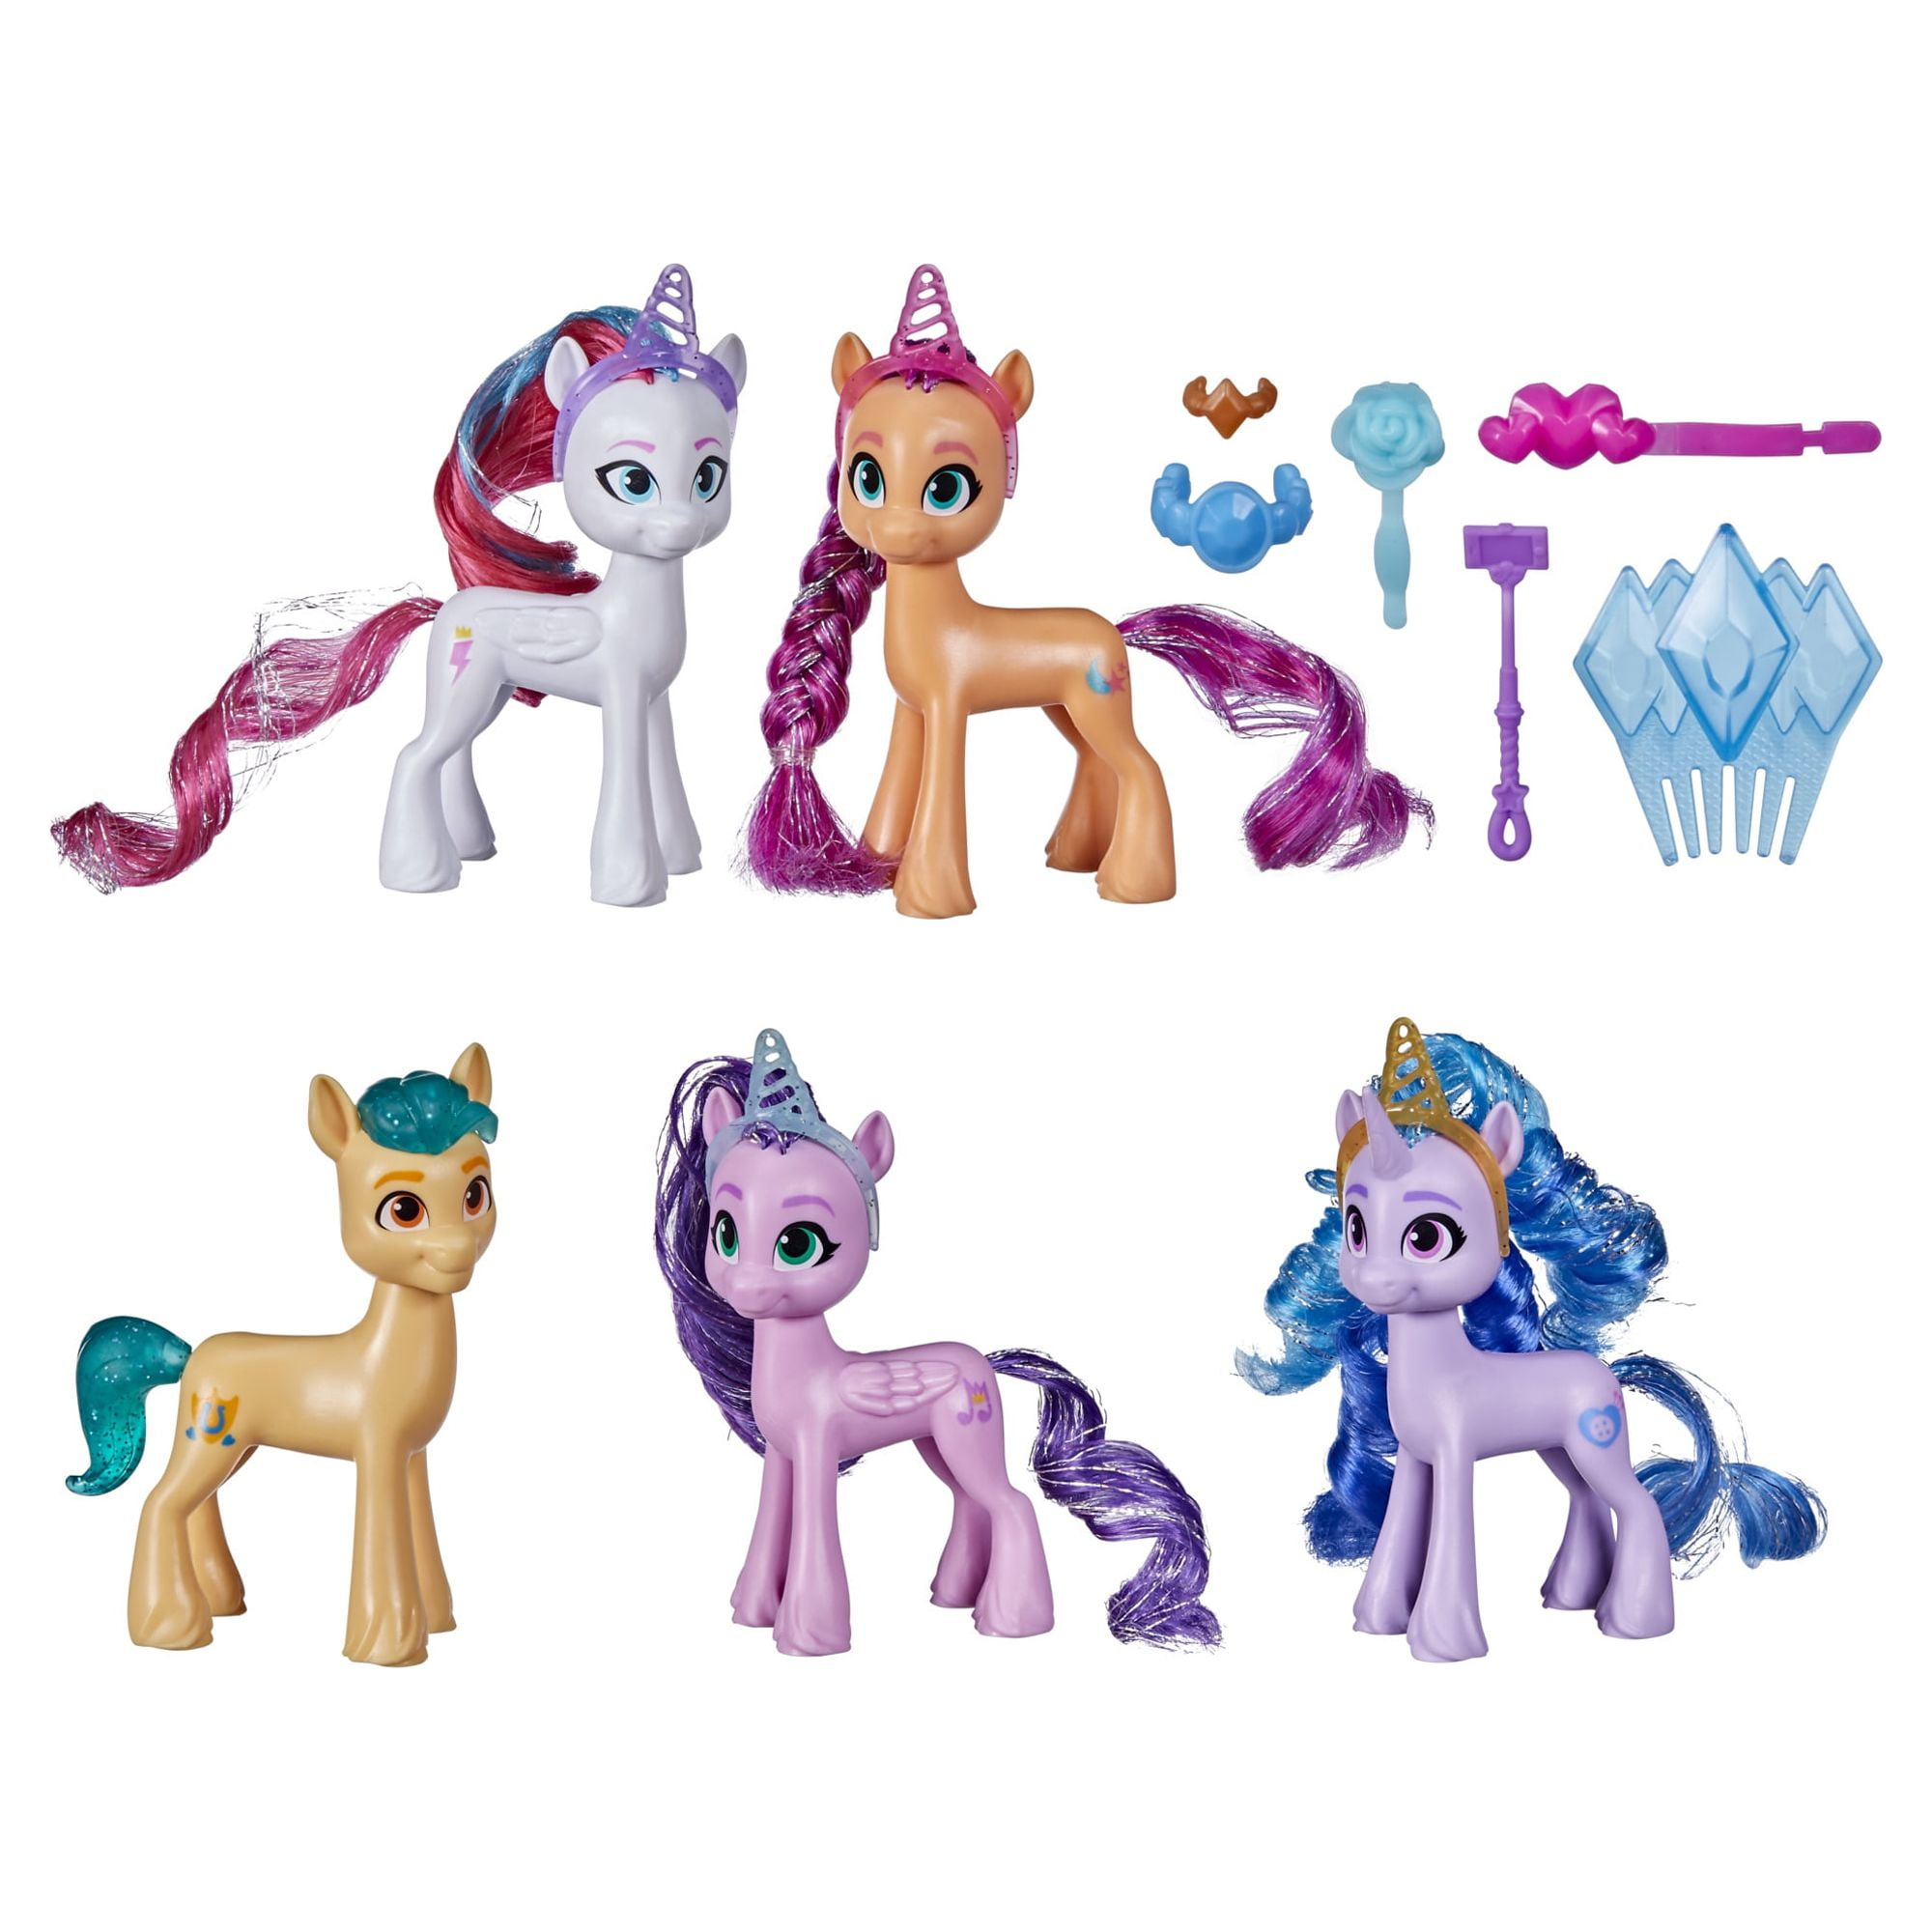 My Little Pony: Generations Review